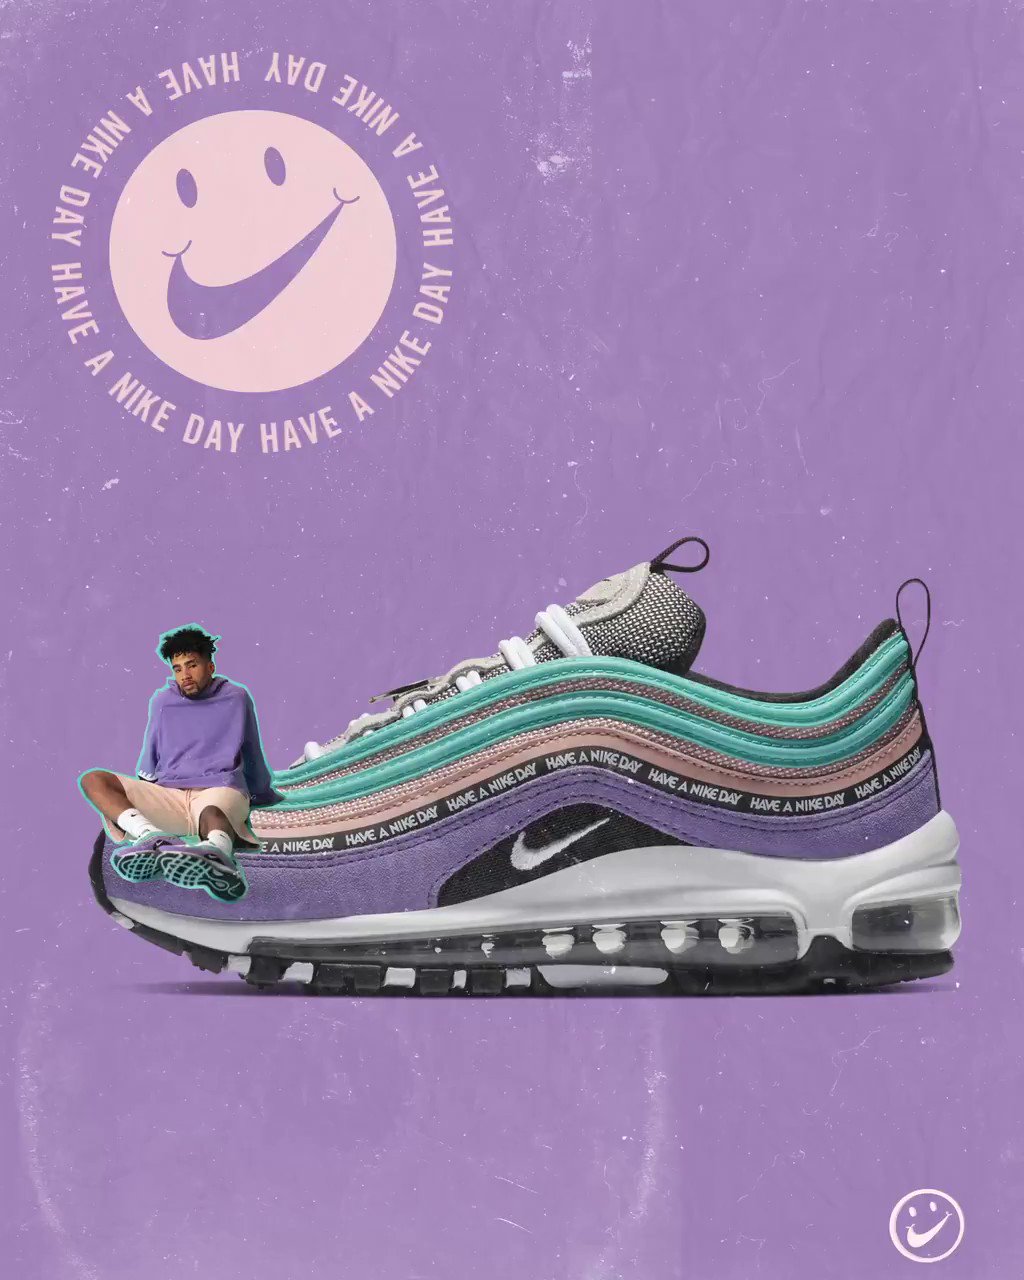 Foot Locker on Twitter: "Big smiles. #Nike Air Max 97 'Have A Nike Day' Available Now, Select Stores! Twitter